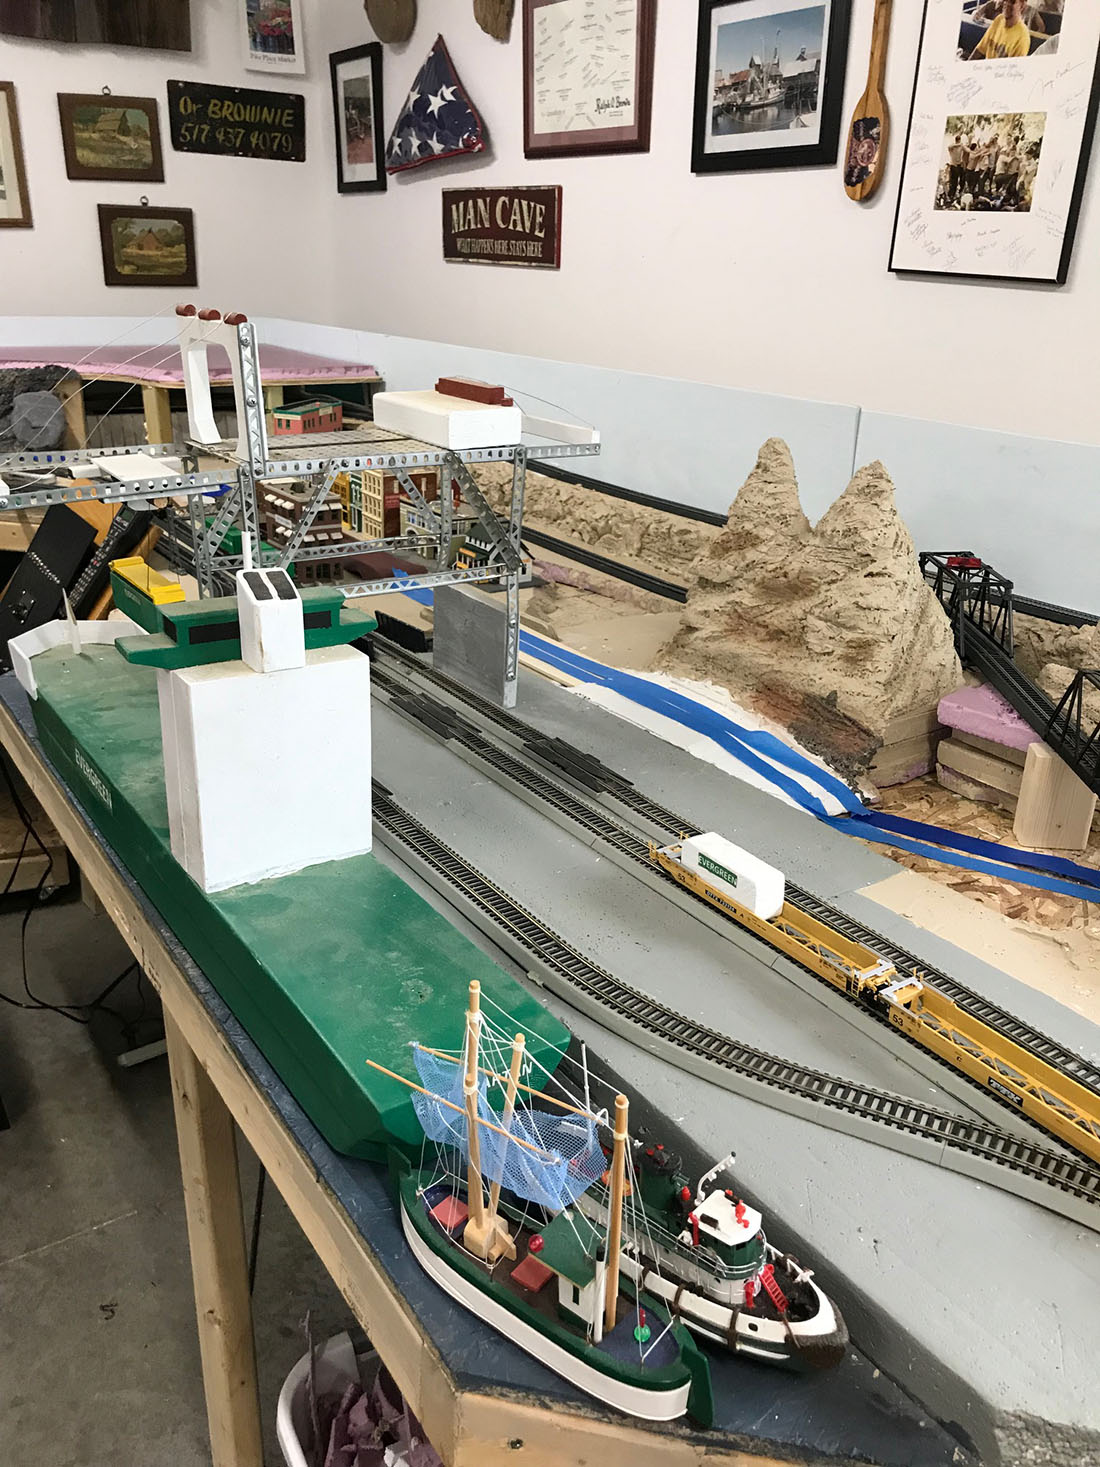 Building HO layout